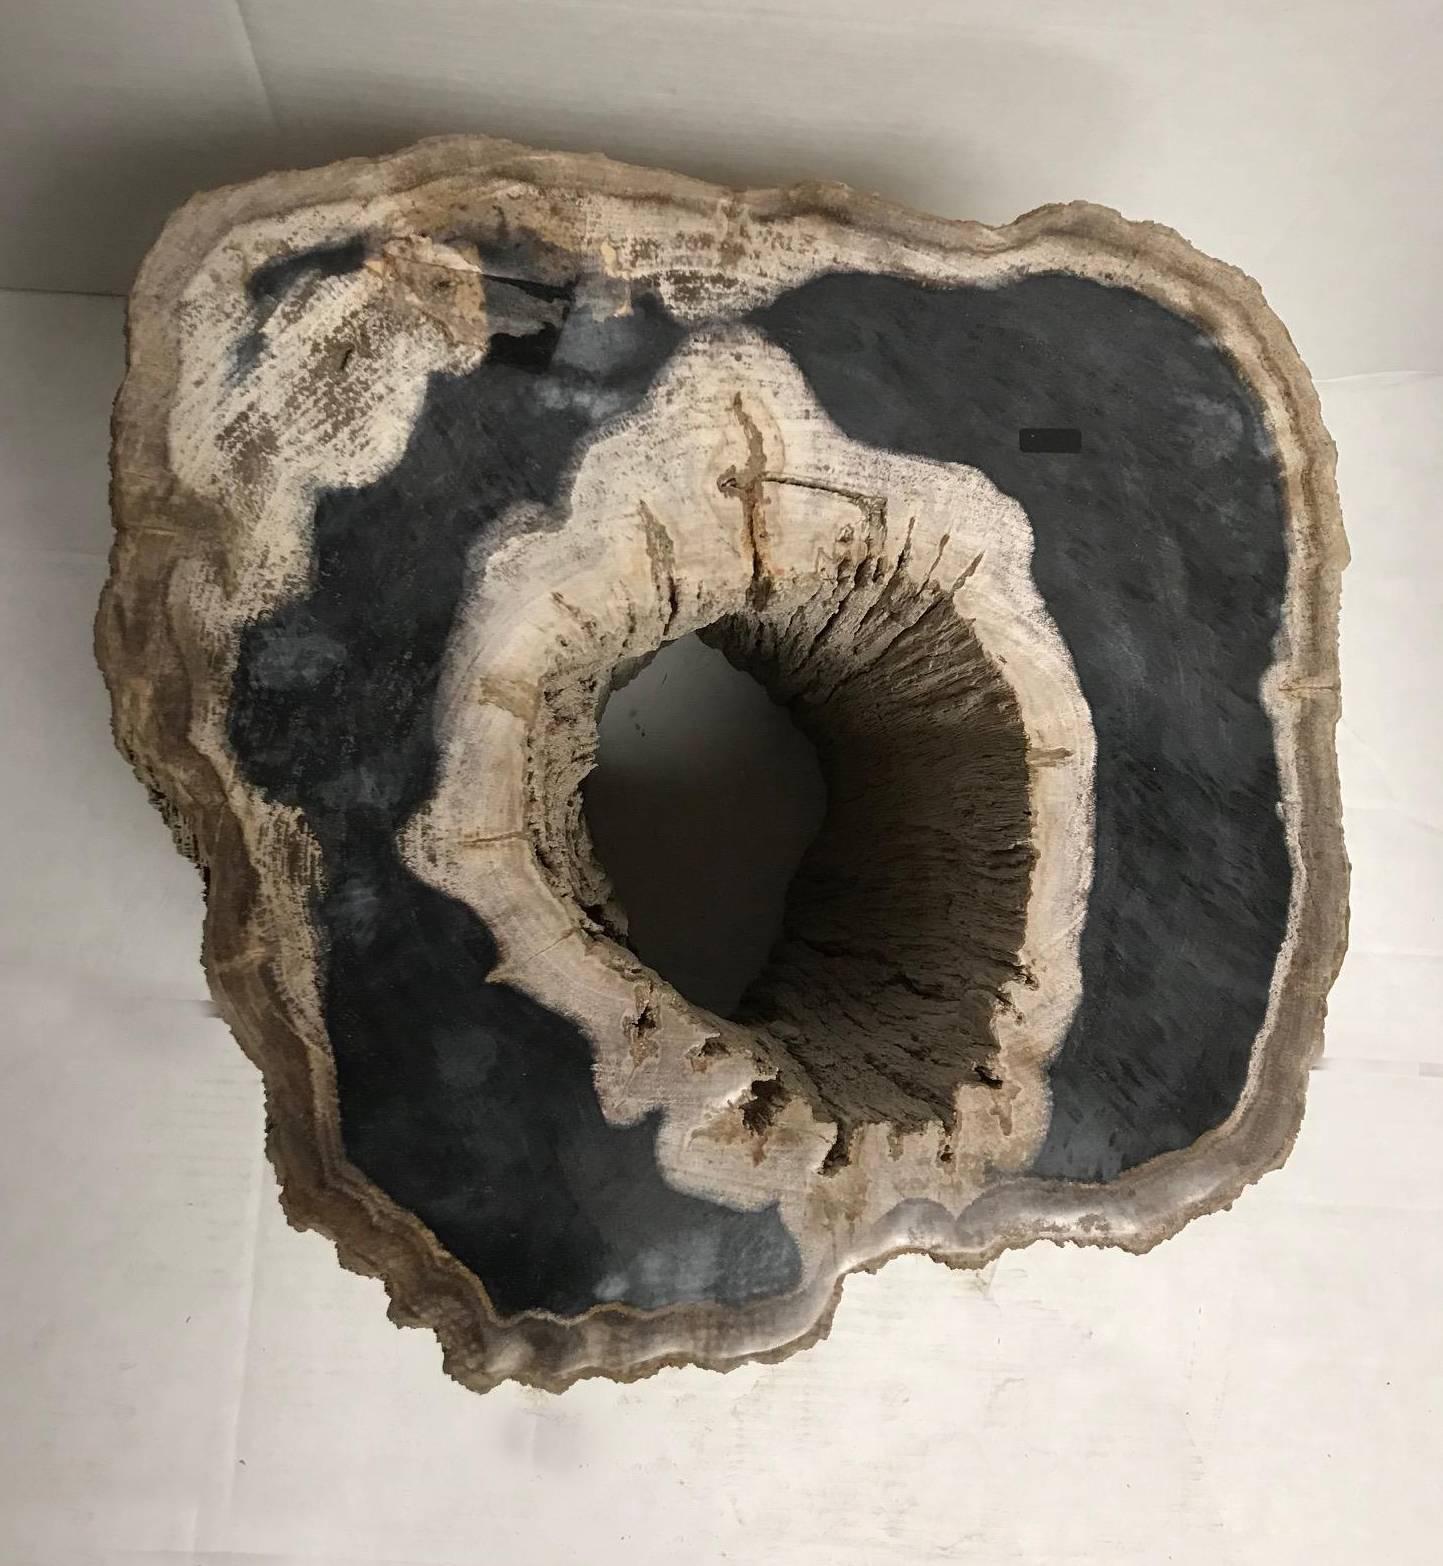 This petrified wood side table is left unpolished or raw on the sides and polished on the top in contrast. It also has a unique hole all the way through so you can see the amazing inside.
Perfect as a cocktail table or side table
Petrified wood is